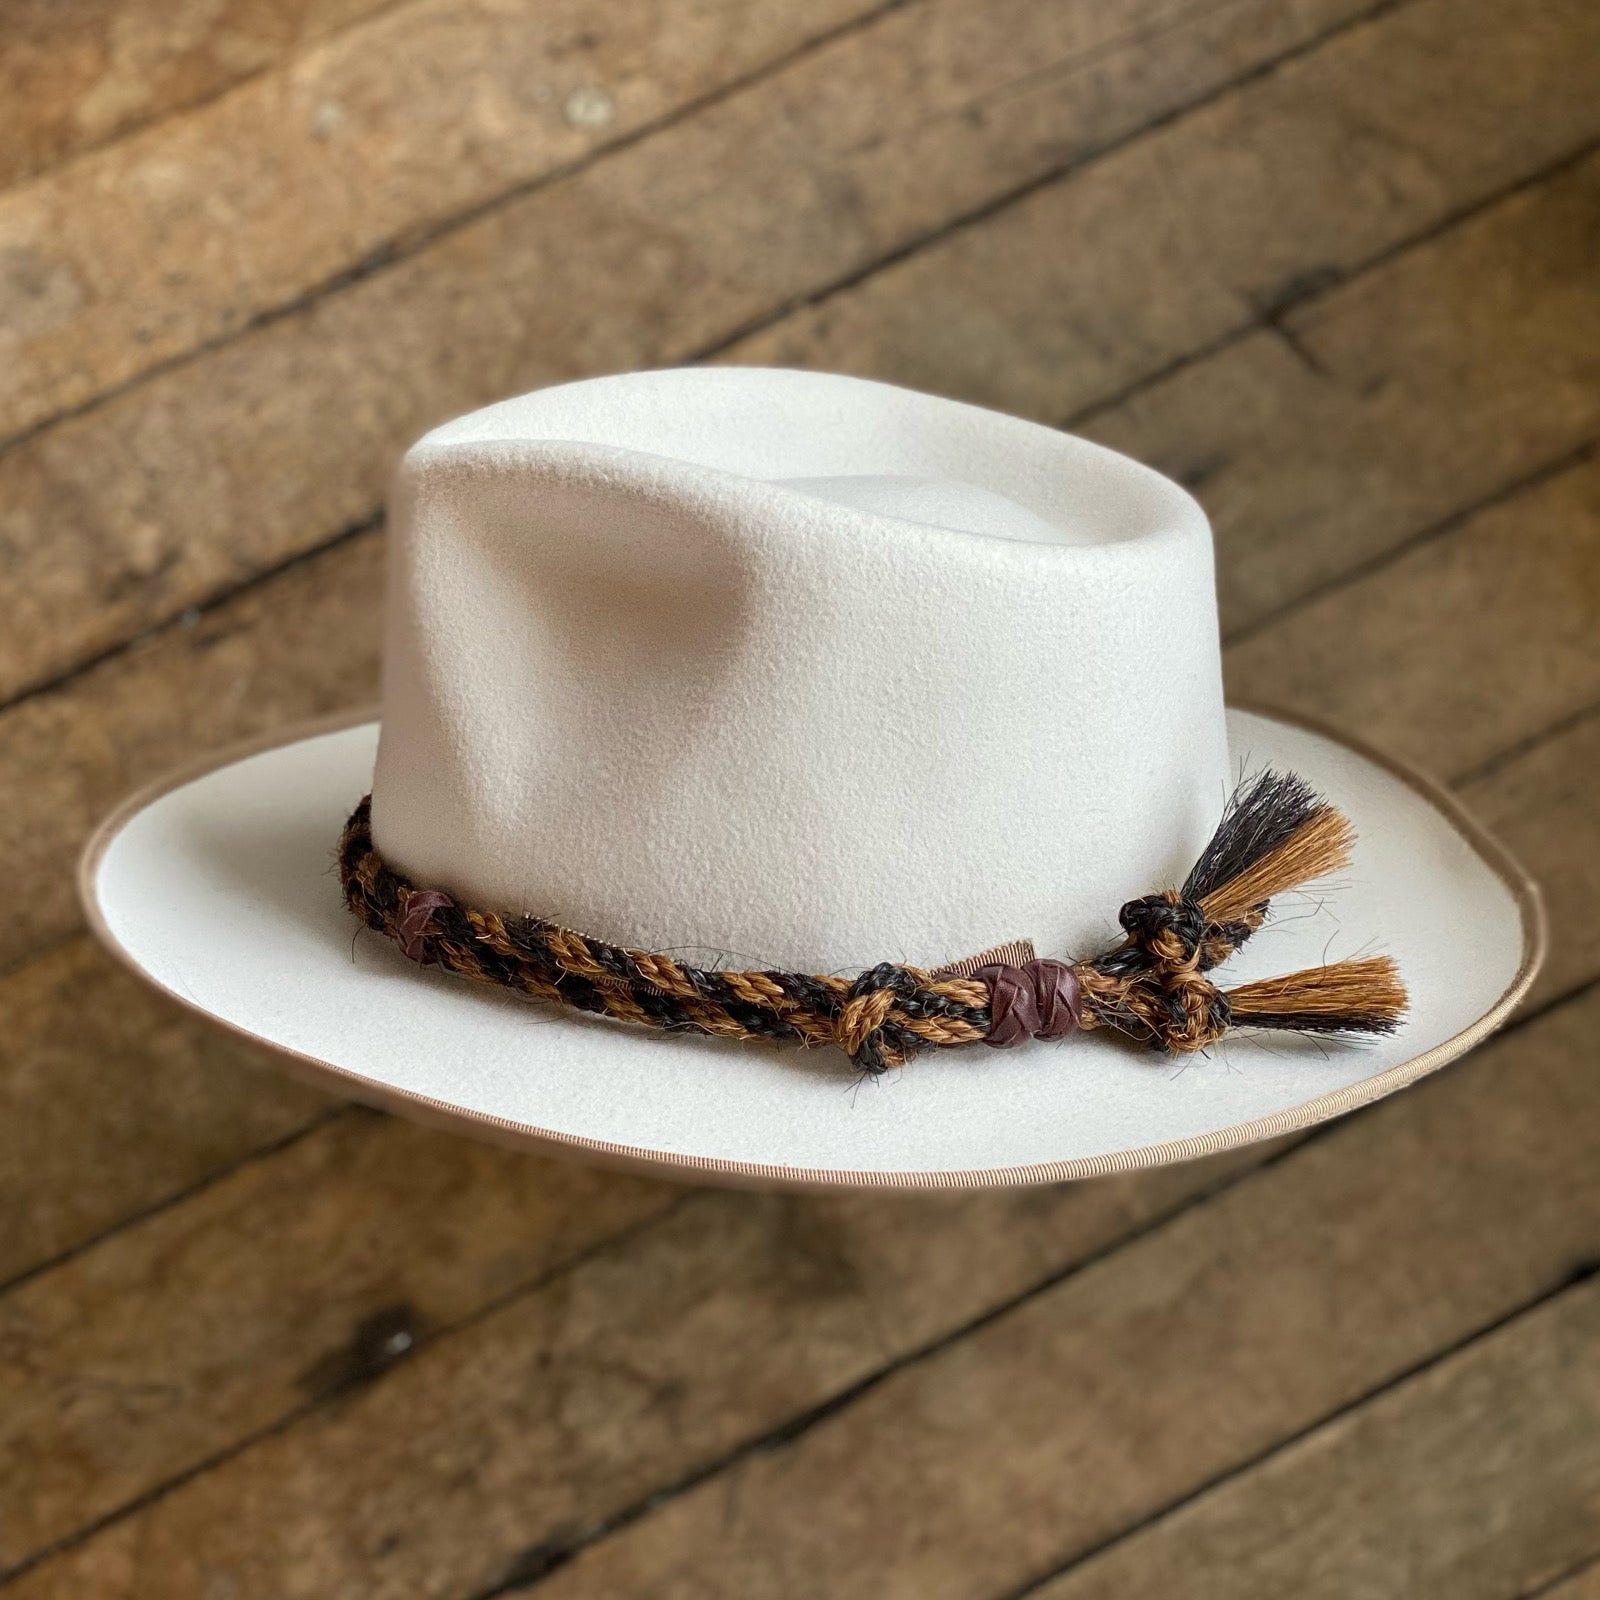 How to Tighten the Hat Band on a Stetson Hat : How to Tighten the Hat Band  on a Stetson Hat 